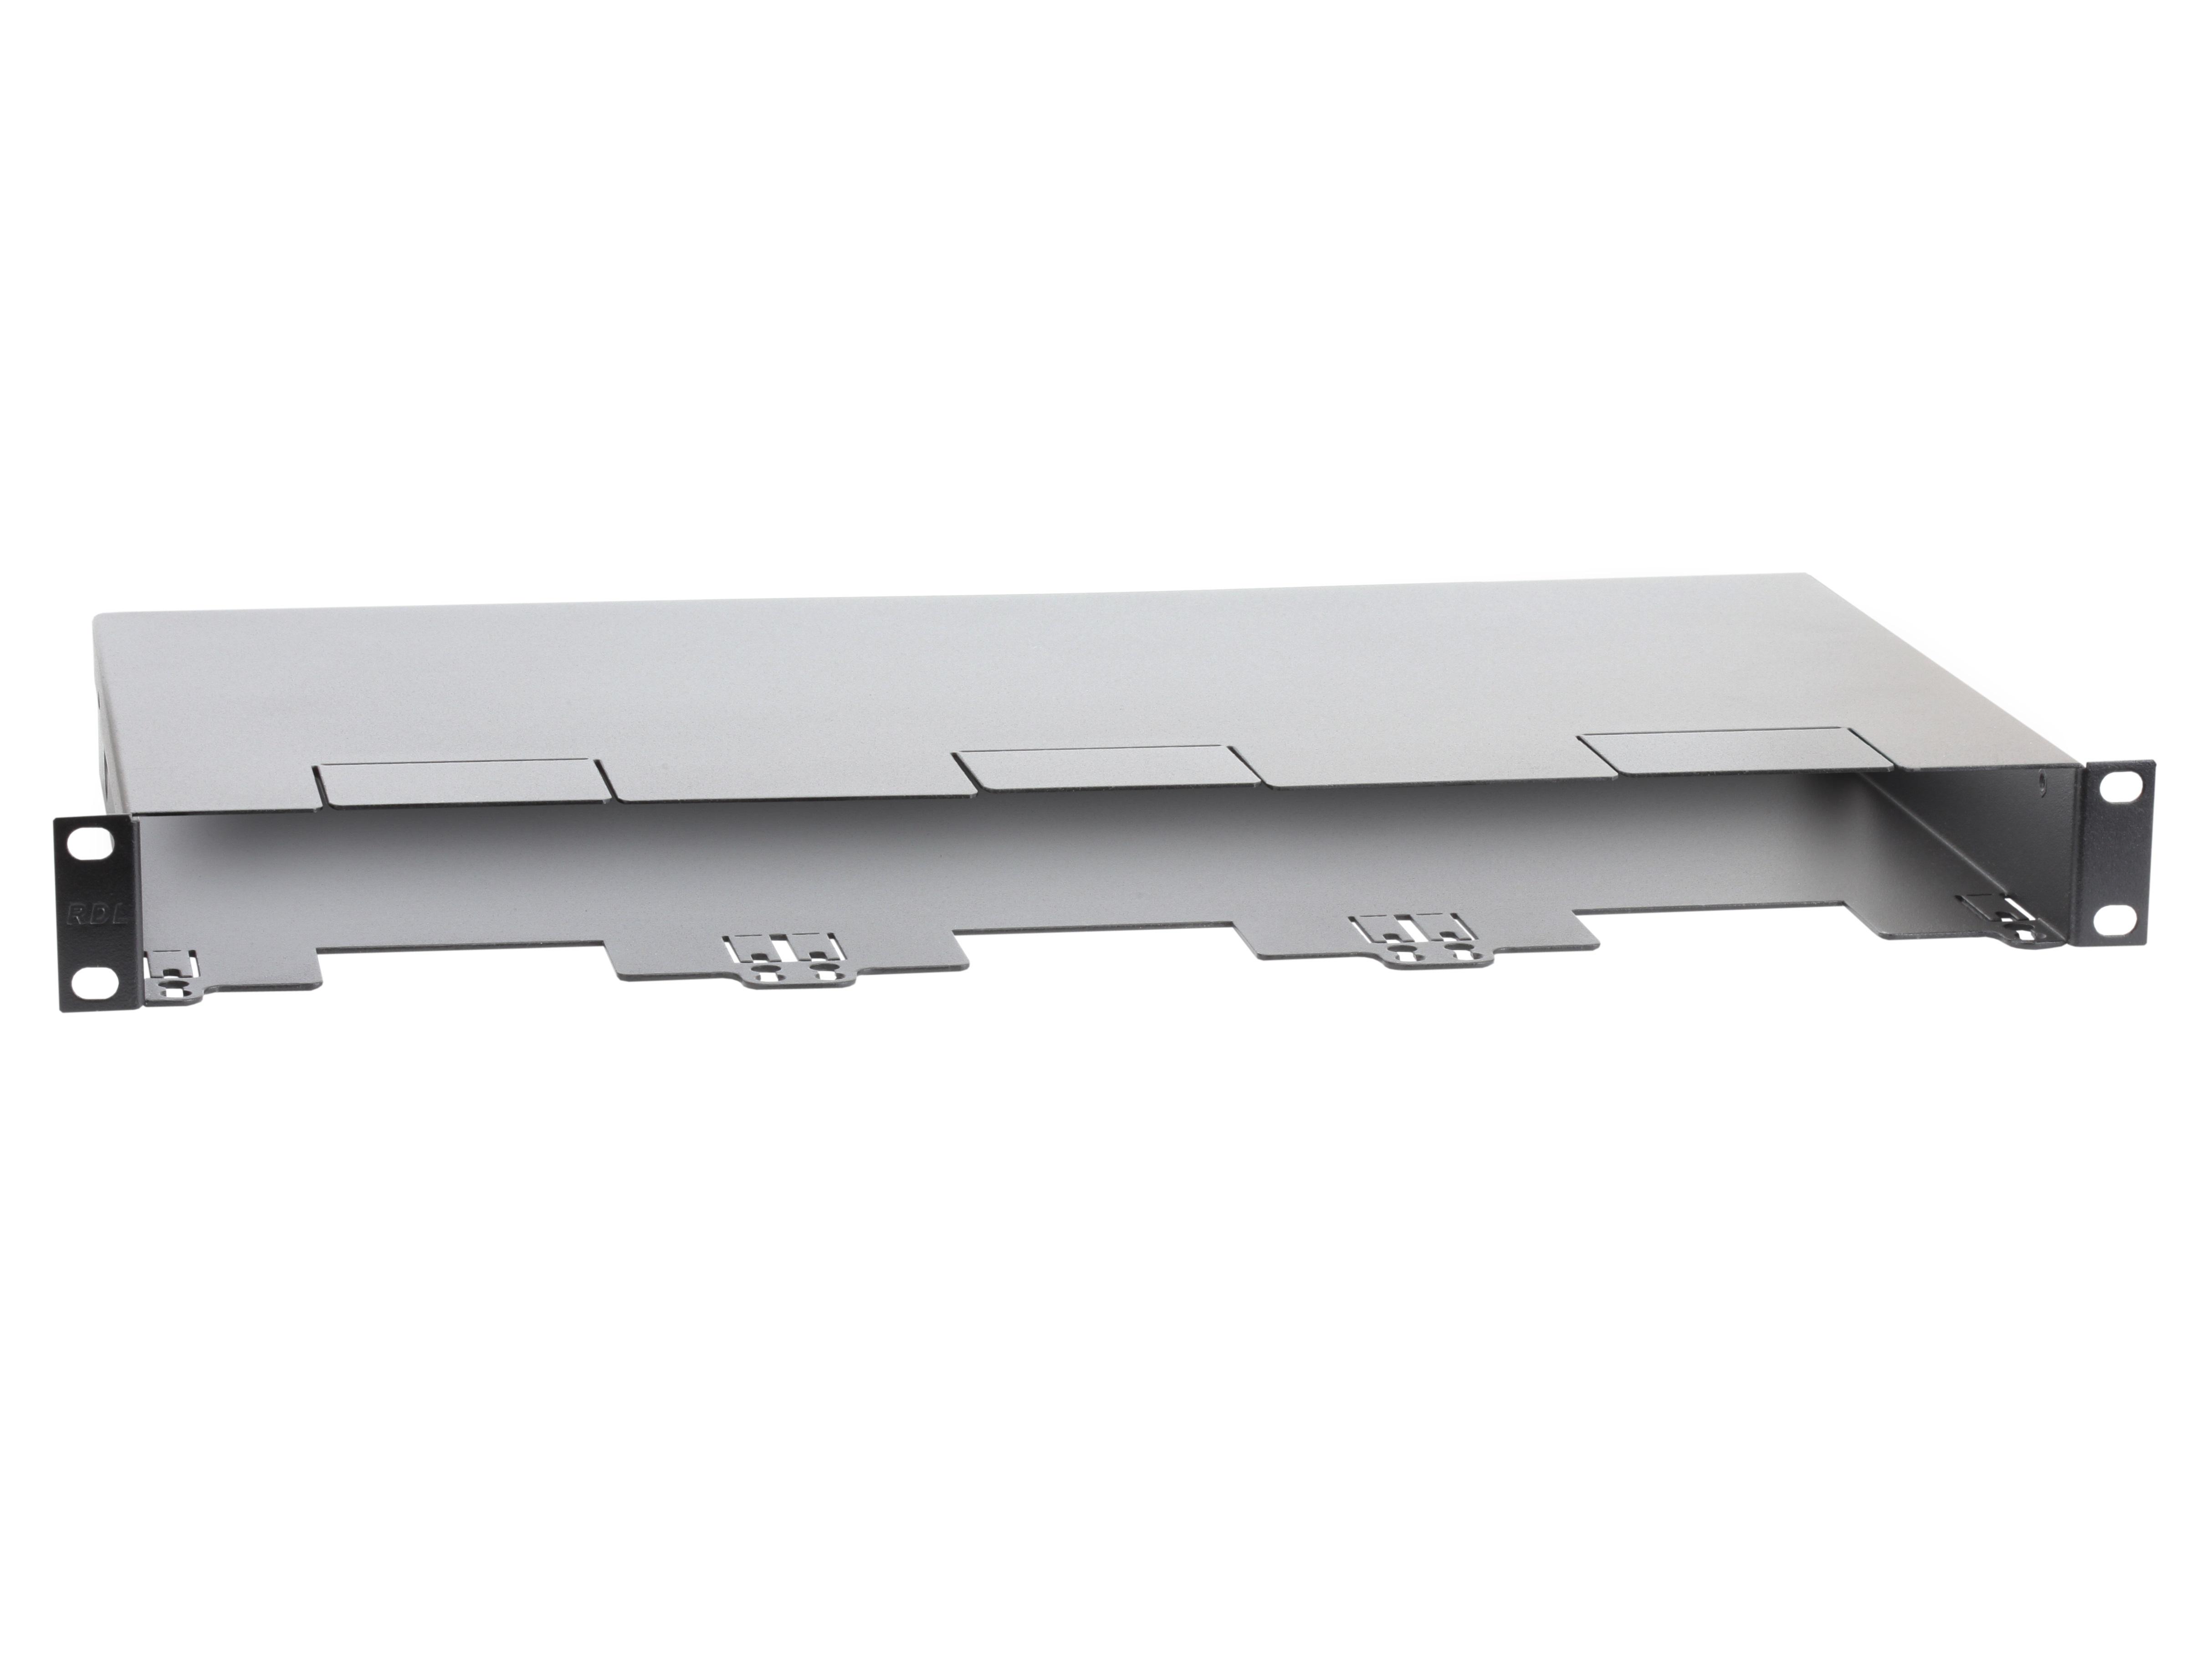 RDL RC-1UR 19 inch Universal Rack Chassis